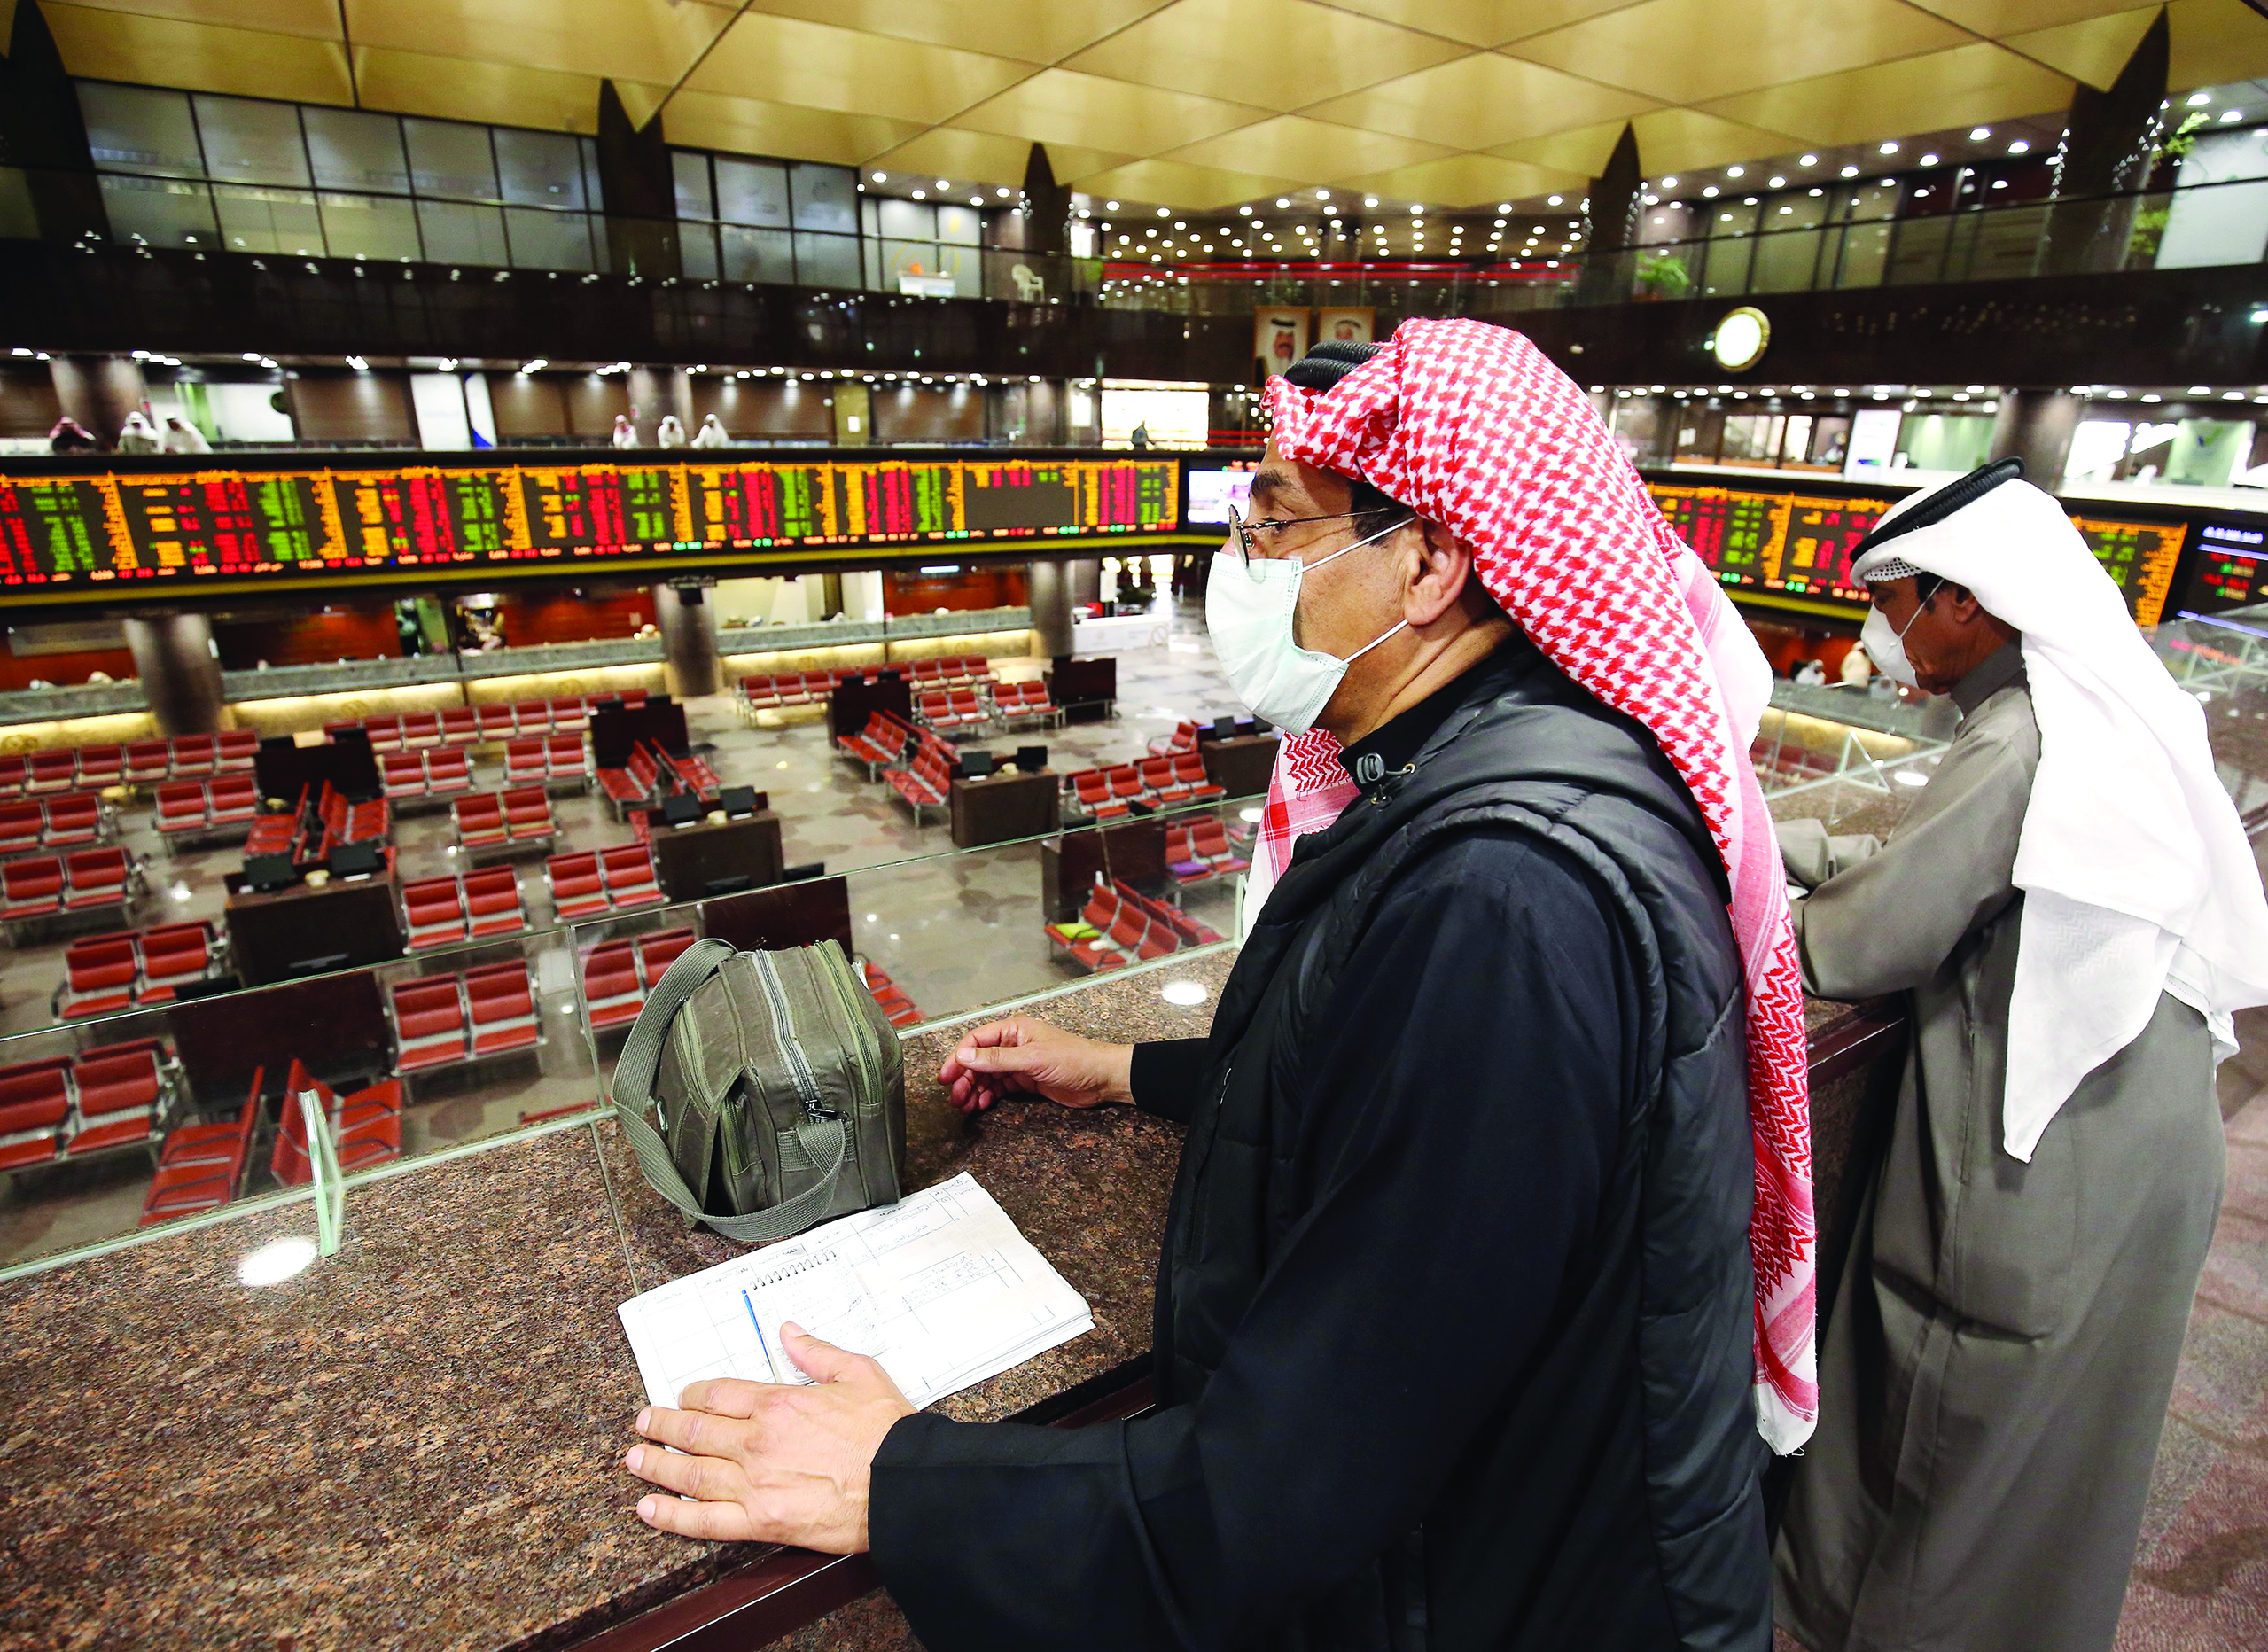 Kuwaiti traders wearing protective masks follow the market at the Boursa Kuwait stock exchange in Kuwait City on March 1, 2020. - Boursa Kuwait decided to close the main trading hall due to the COVID-19 coronavirus disease developments. Stock markets in the oil-rich Gulf states plunged on March 1 over fears of the impact of the coronavirus, which also battered global bourses last week. All of the seven exchanges in the Gulf Cooperation Council (GCC), which were closed the previous two days for the Muslim weekend, were hit as oil prices dropped below $50 a barrel. The region's slide was led by Kuwait Boursa, where the All-Share Index fell 10 percent, triggering its closure. Kuwait's bourse was closed for most of last week for national holidays. (Photo by YASSER AL-ZAYYAT / AFP)